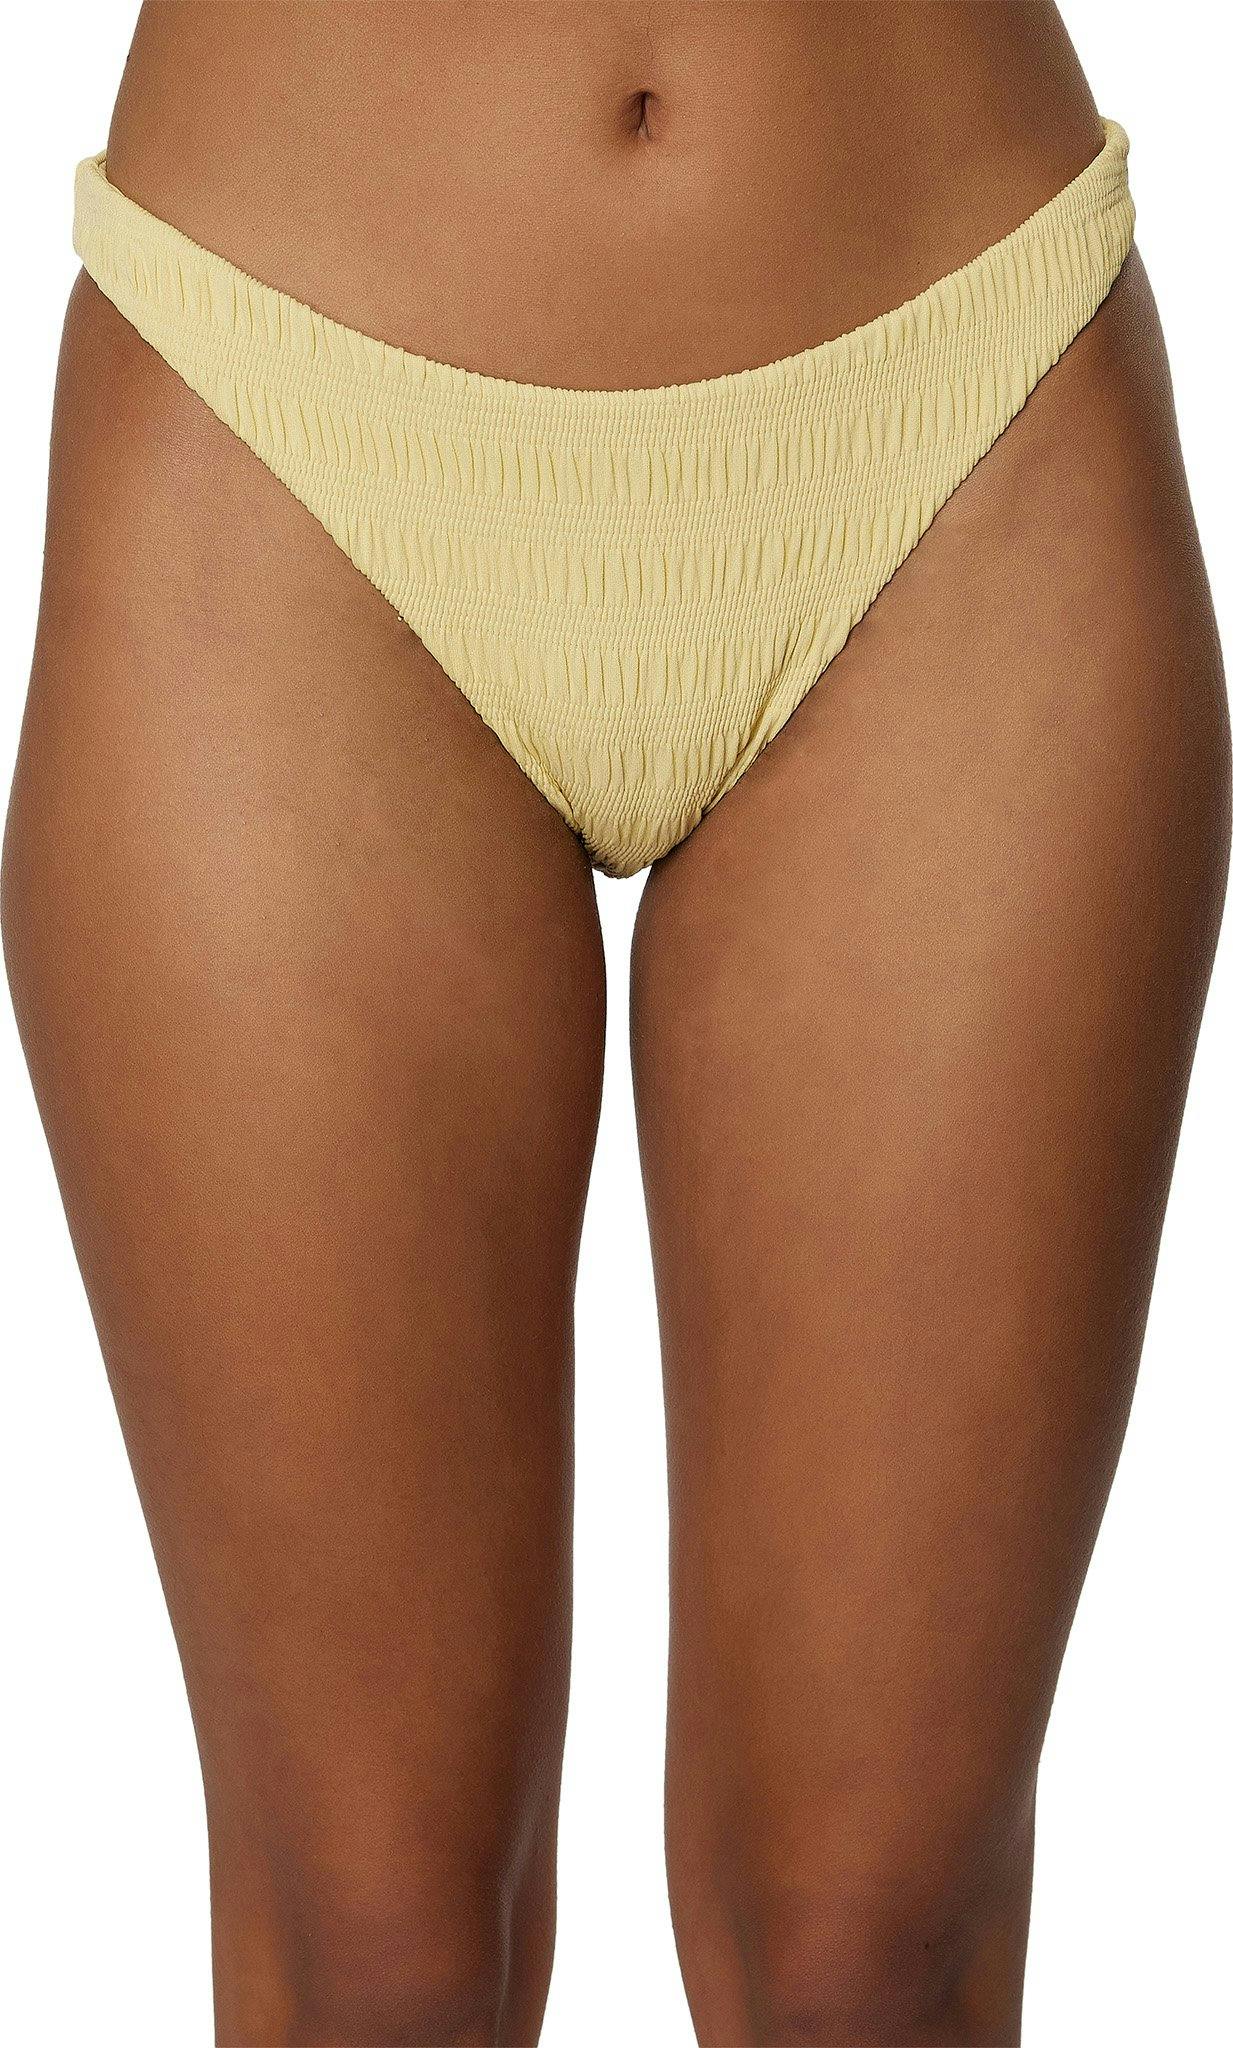 Product image for Saltwater Solids Texture Flamenco Swim Bottom - Women's